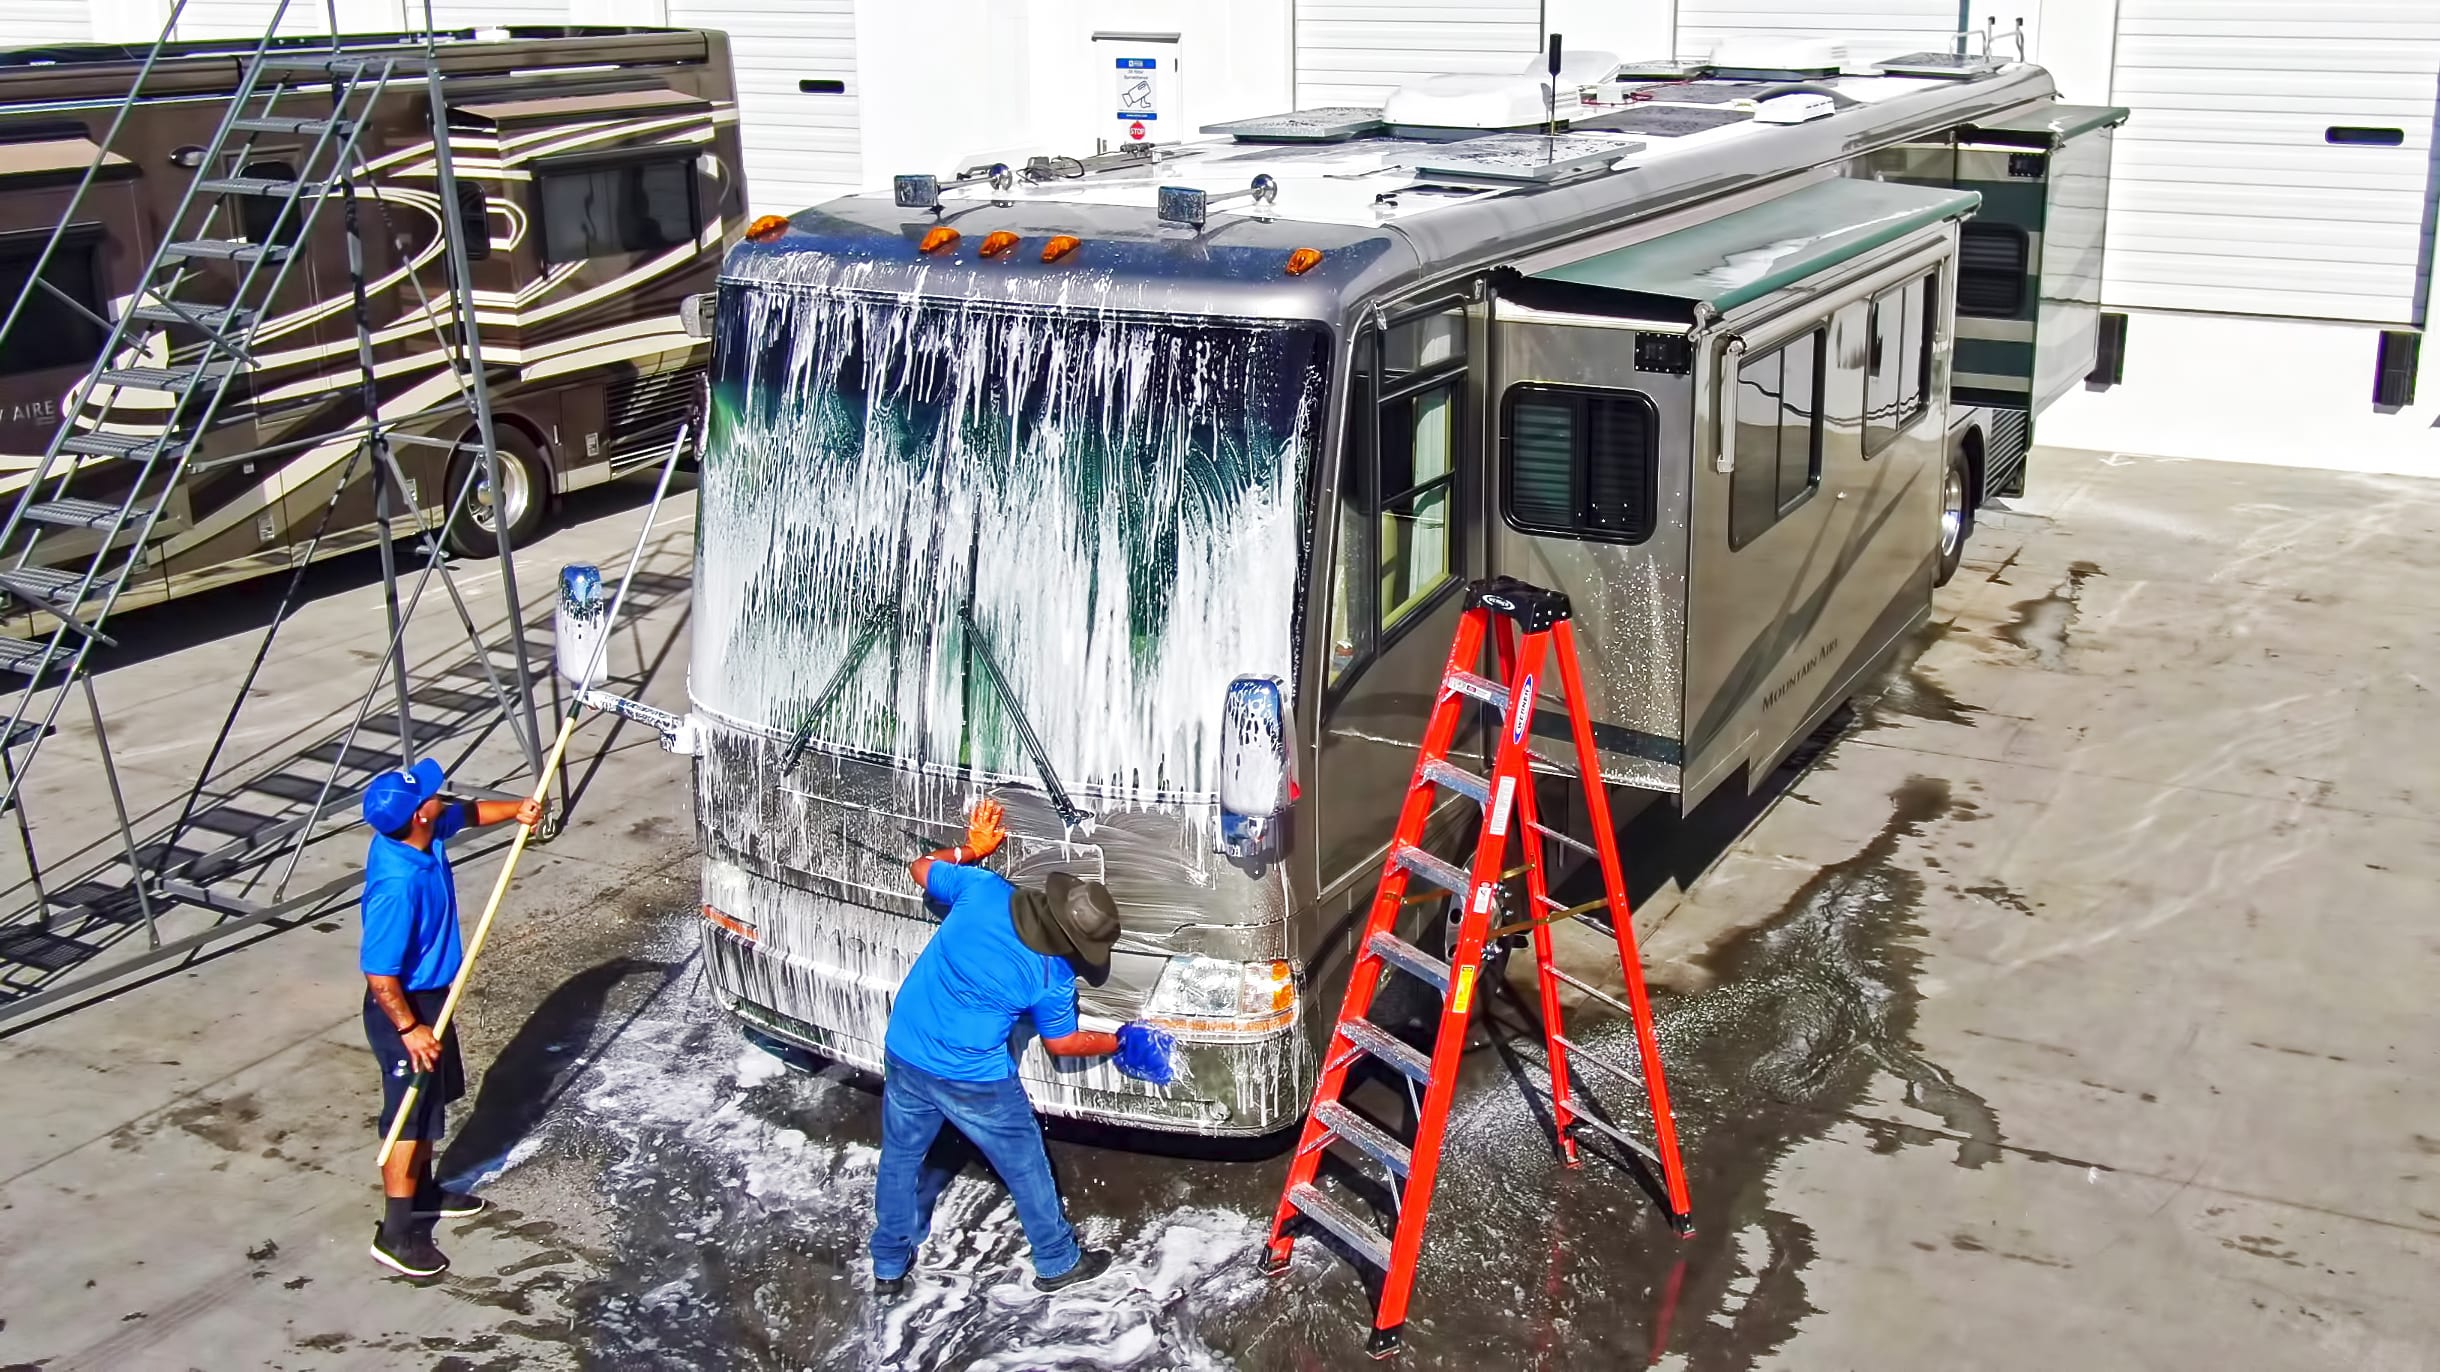 What to Expect with the NIRVC RV Detailing Service